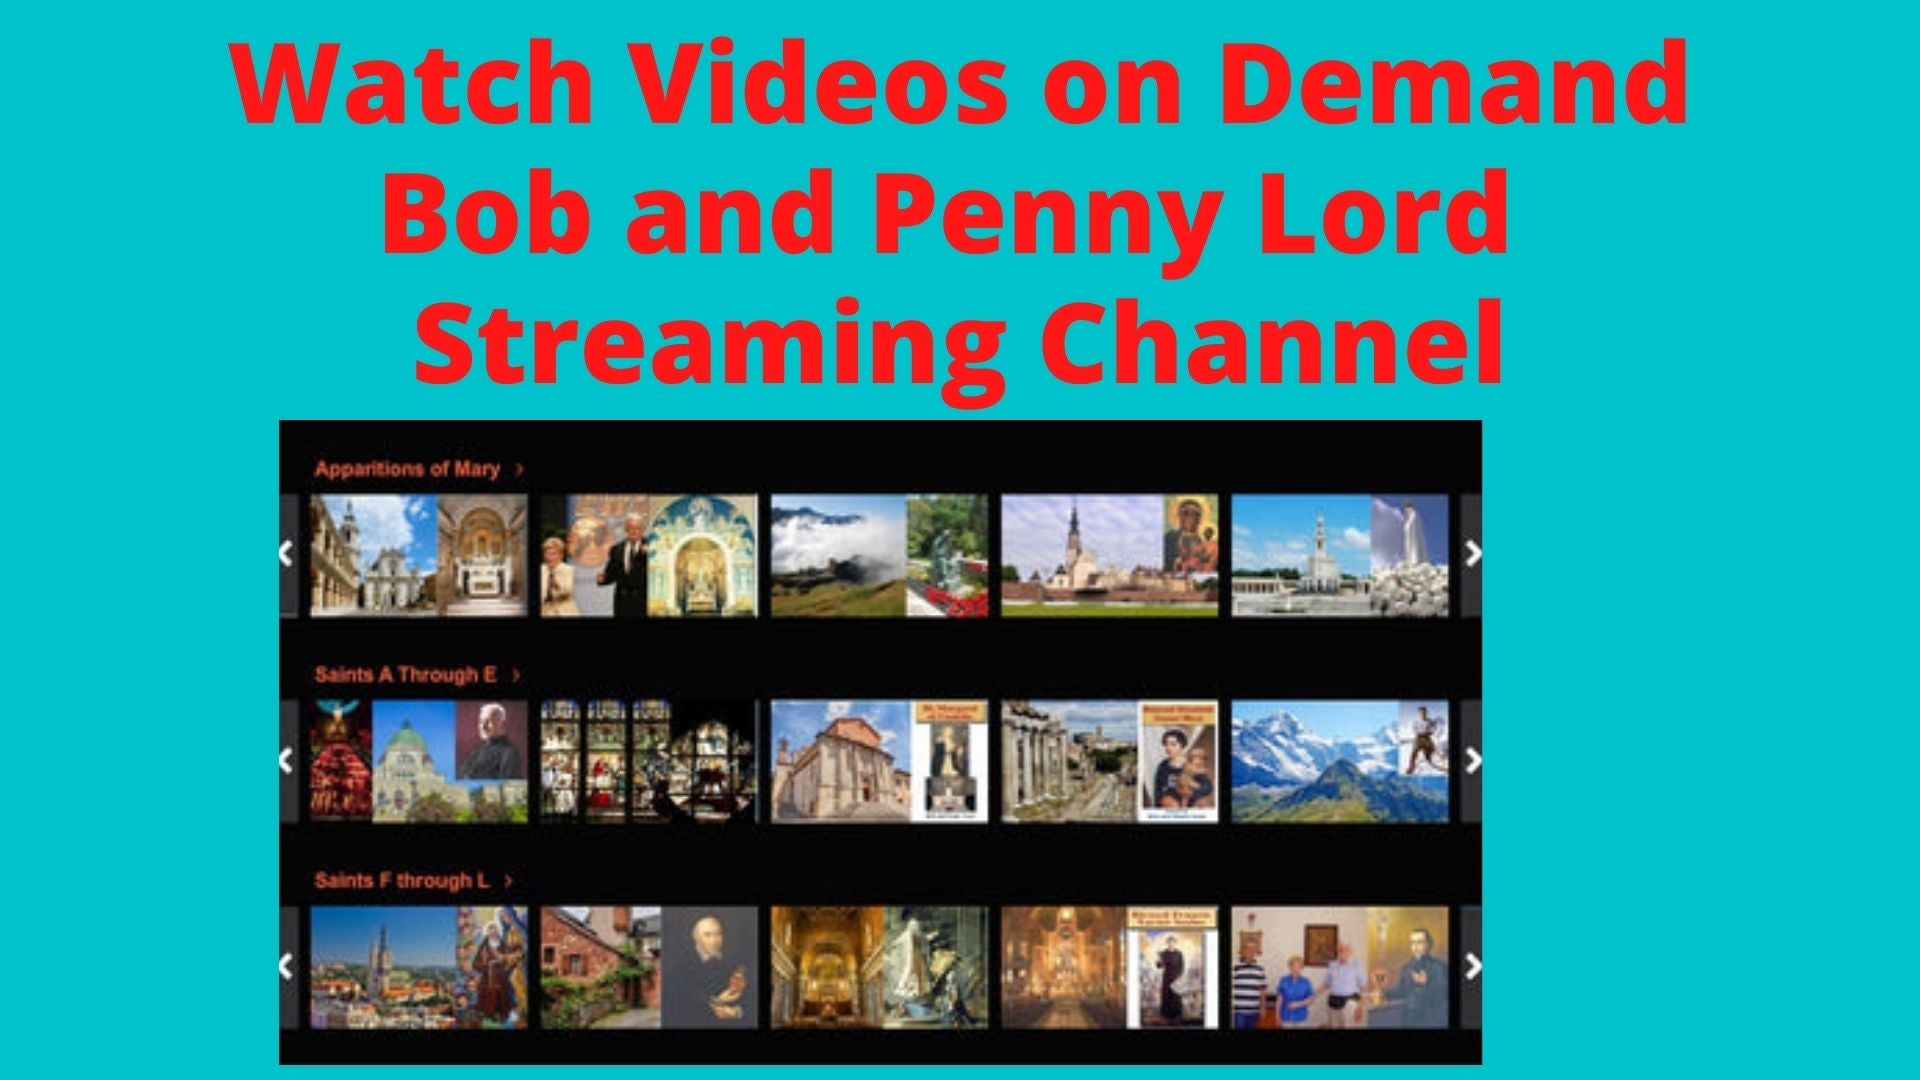 Two Year Subscription to Bob and Penny Lord TV Channel - Bob and Penny Lord